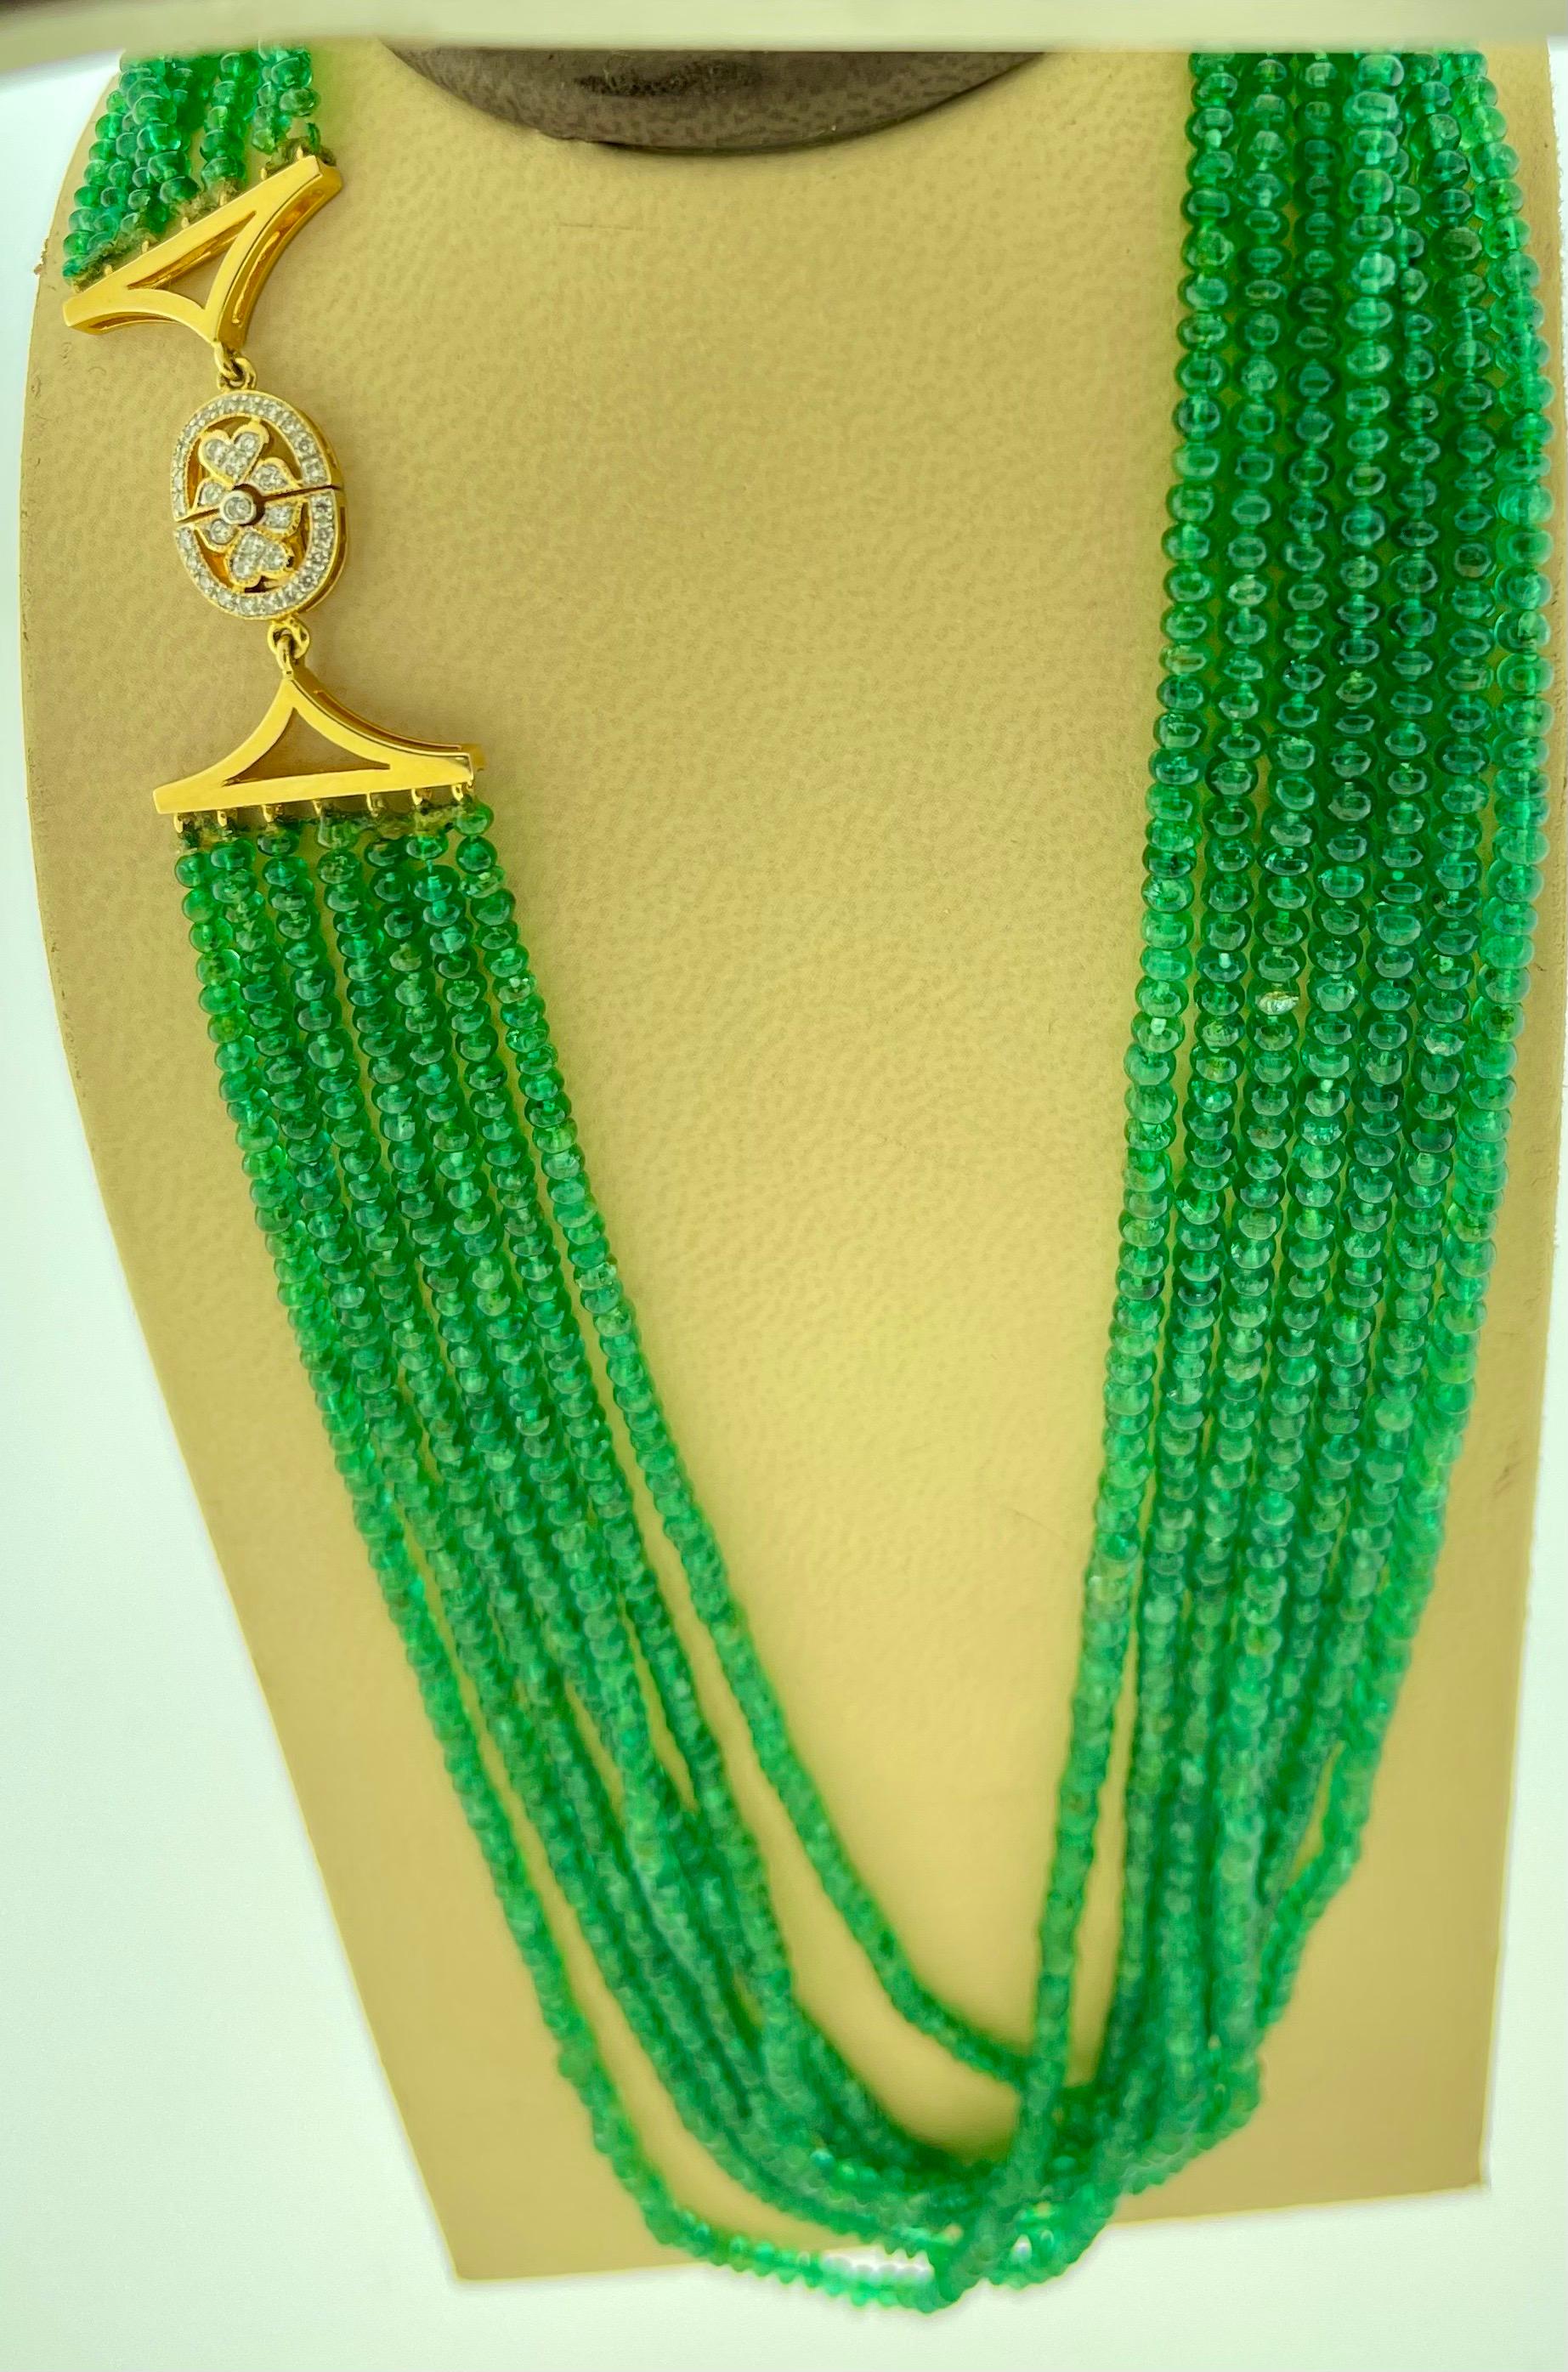 200 Carat Emerald Beads 7 Line Necklace with Diamond Clasp 18 Karat Yellow Gold For Sale 1